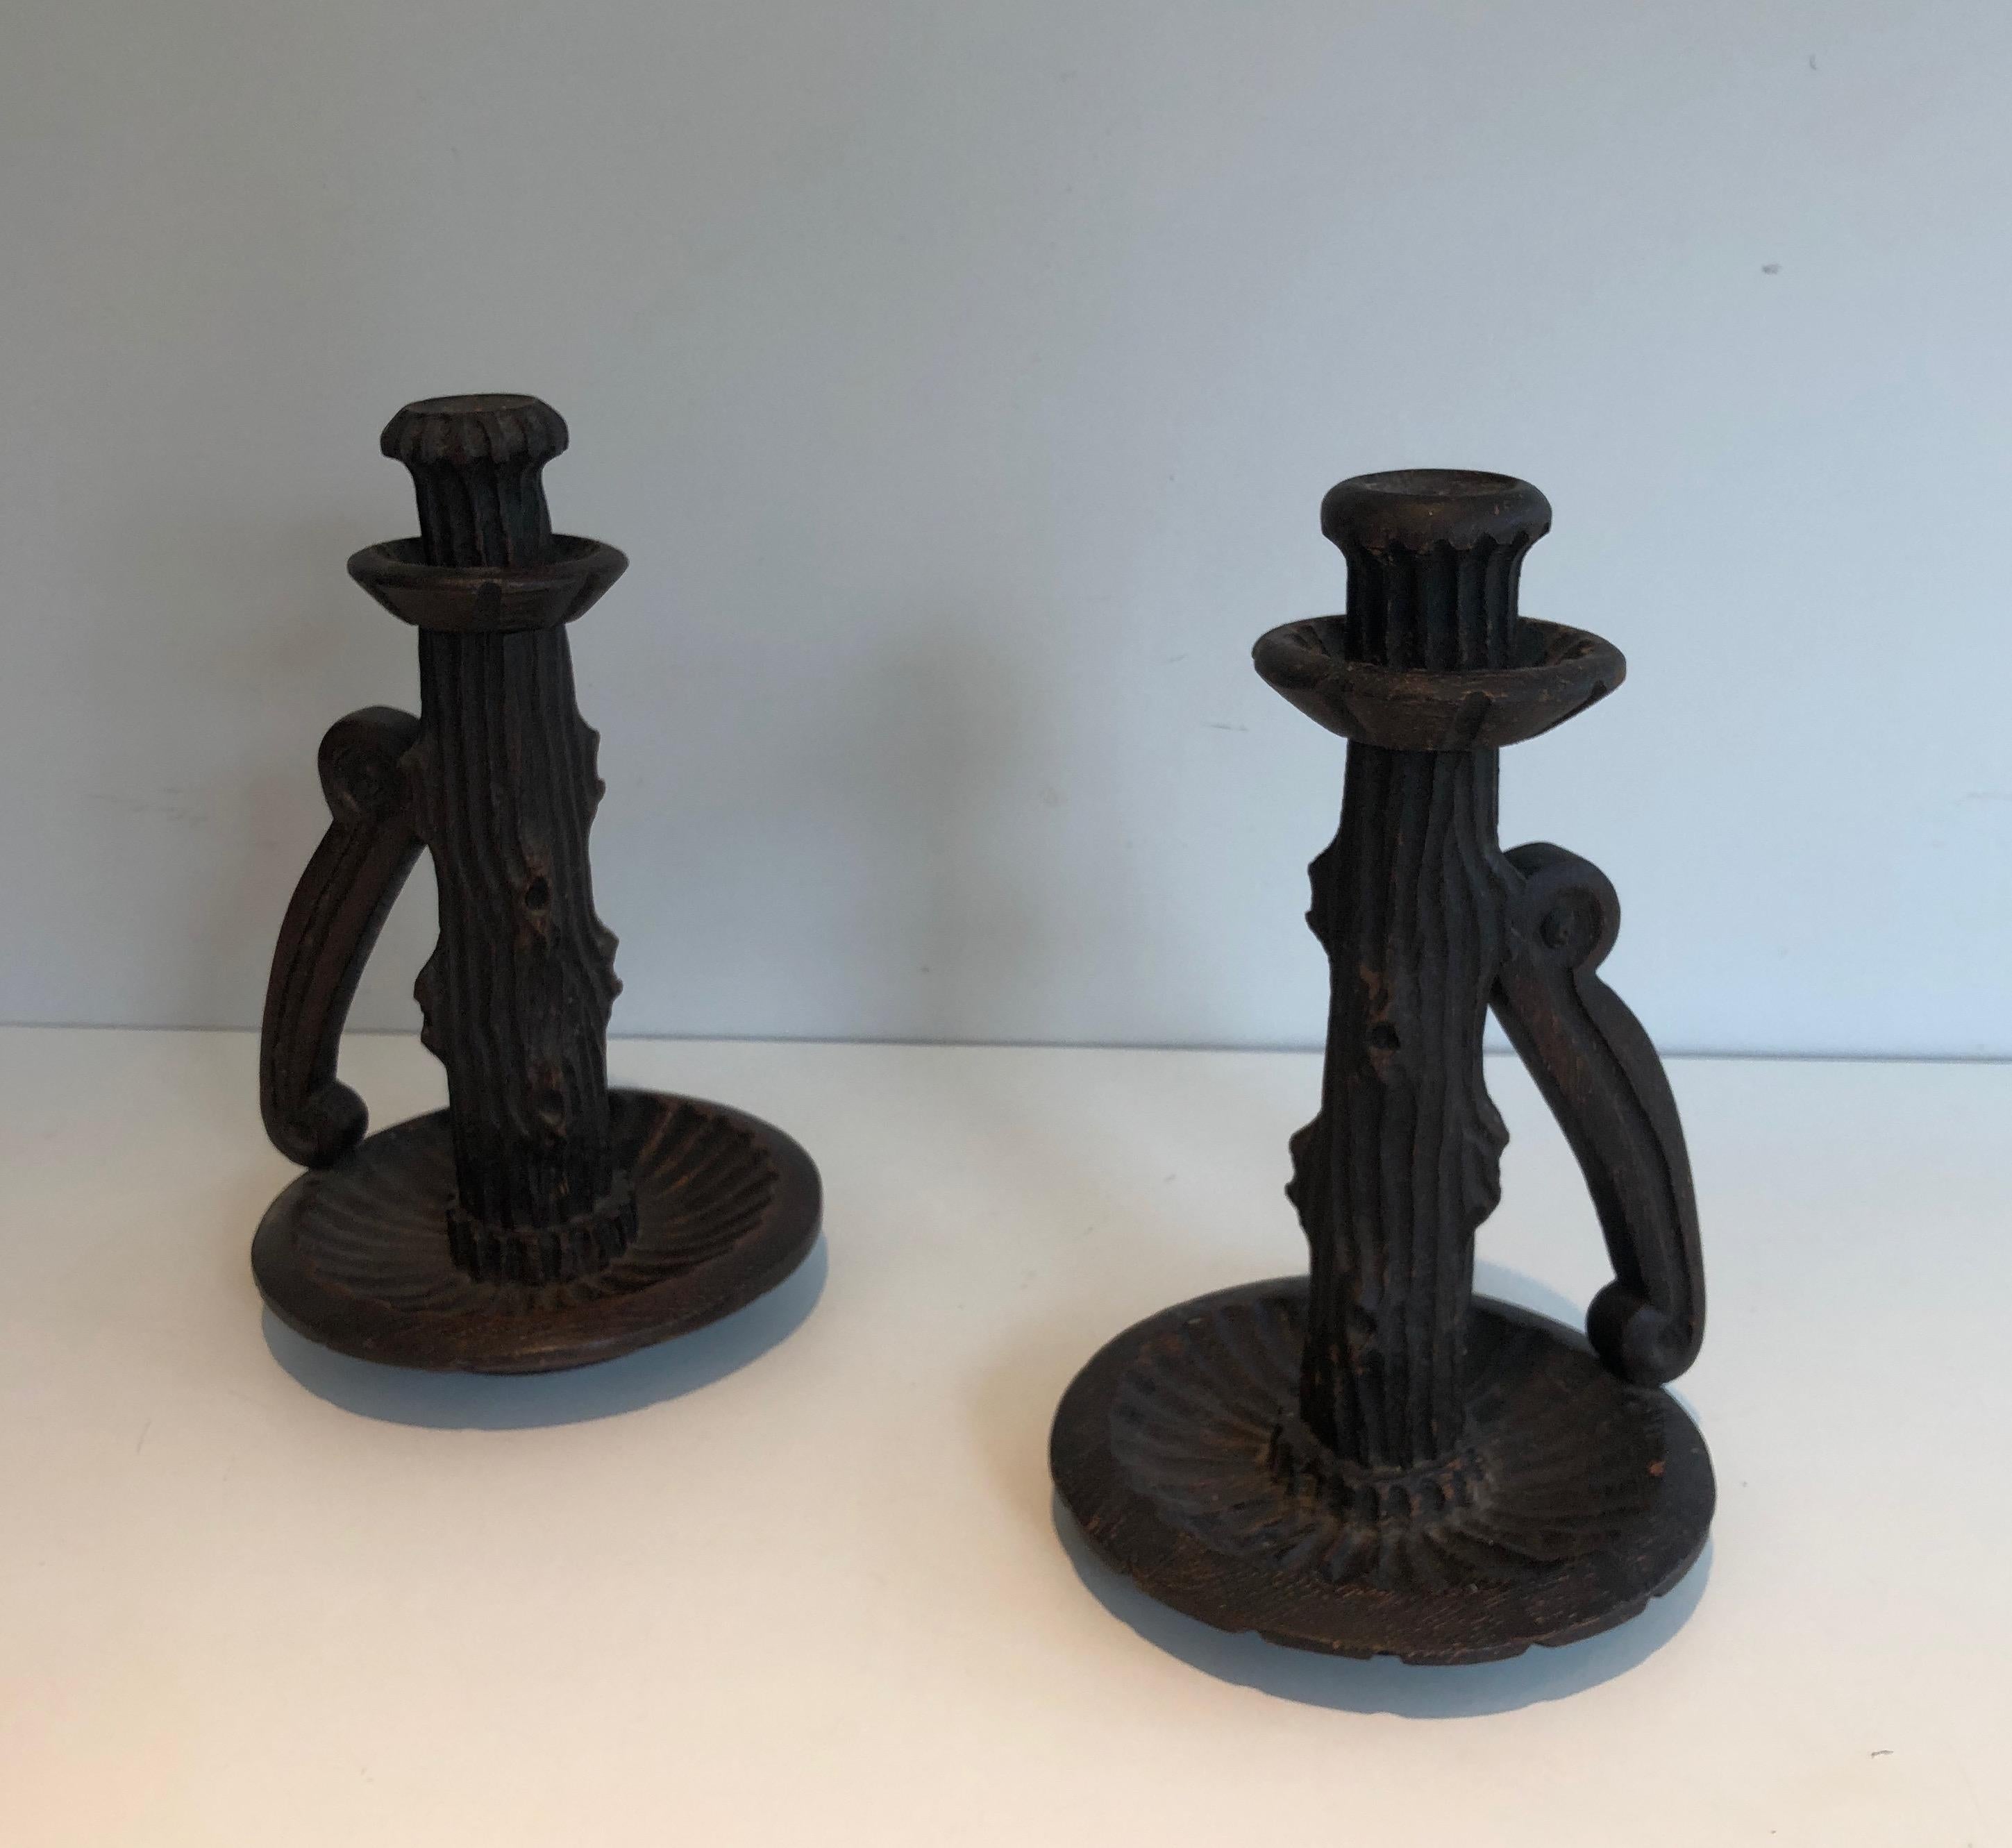 Pair of Tall Brutalist Candle Holders Made of Carved Wood, French, circa 1950 For Sale 15